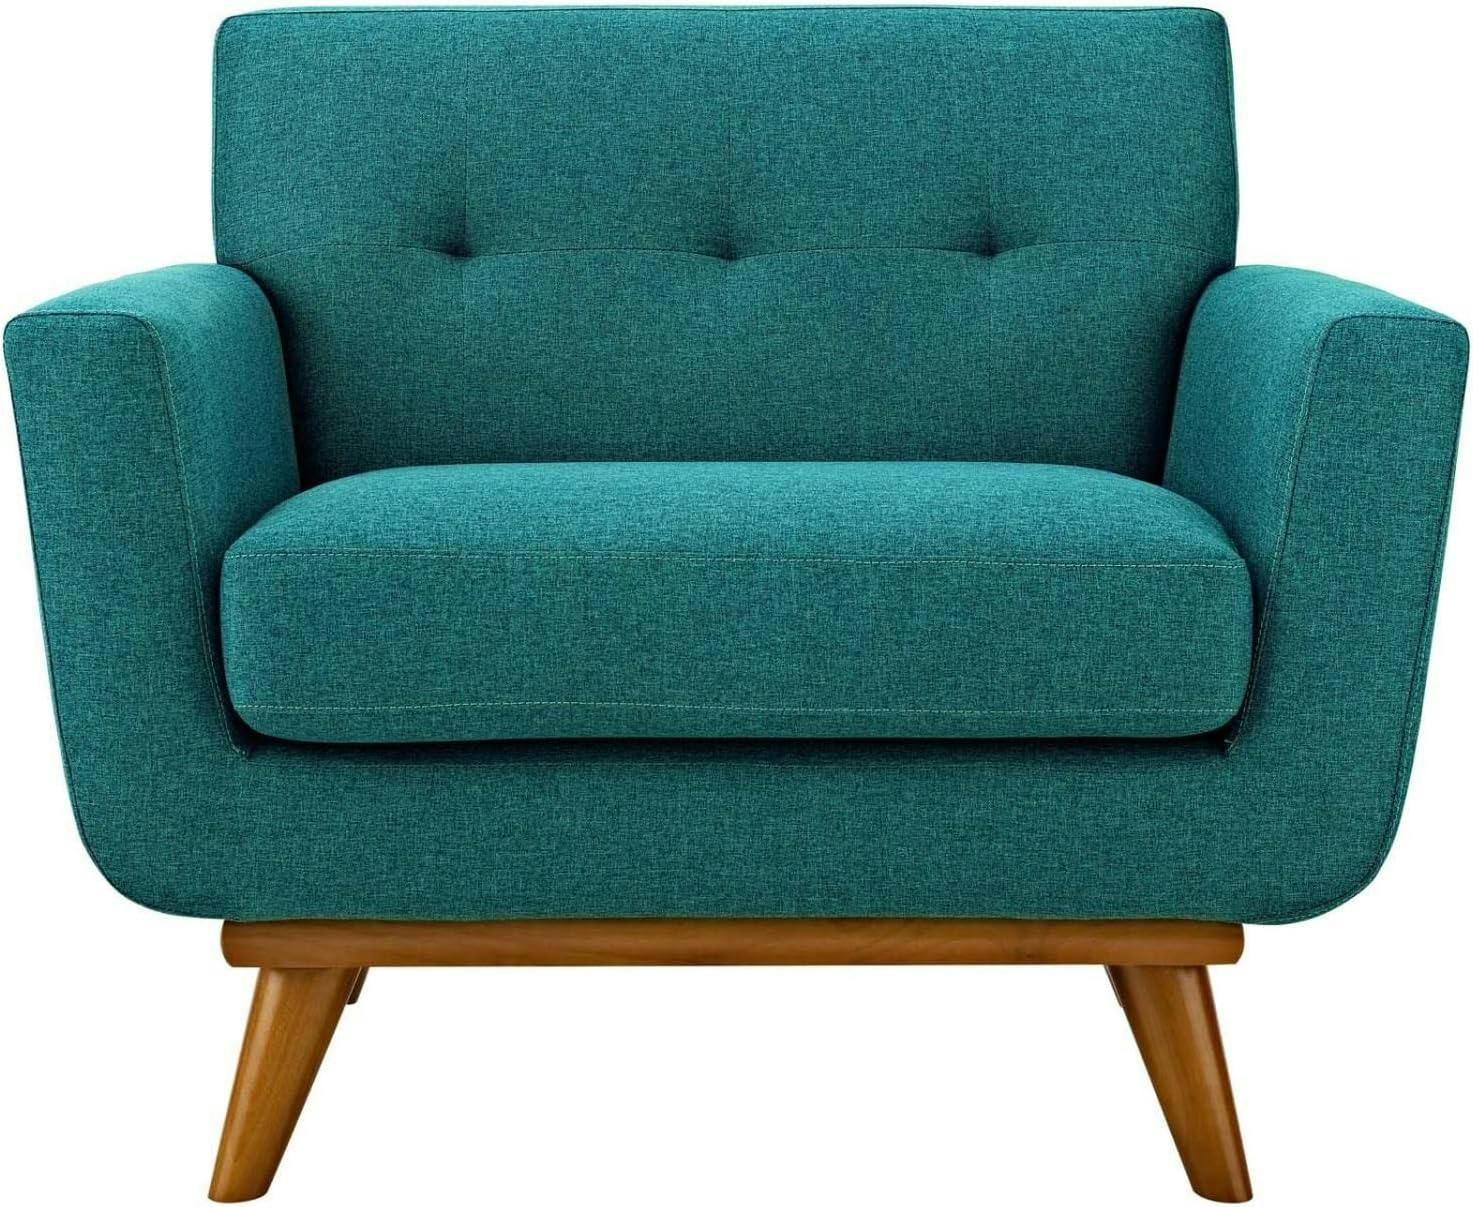 Teal Blue Plush Fabric Accent Armchair with Cherry Wood Legs